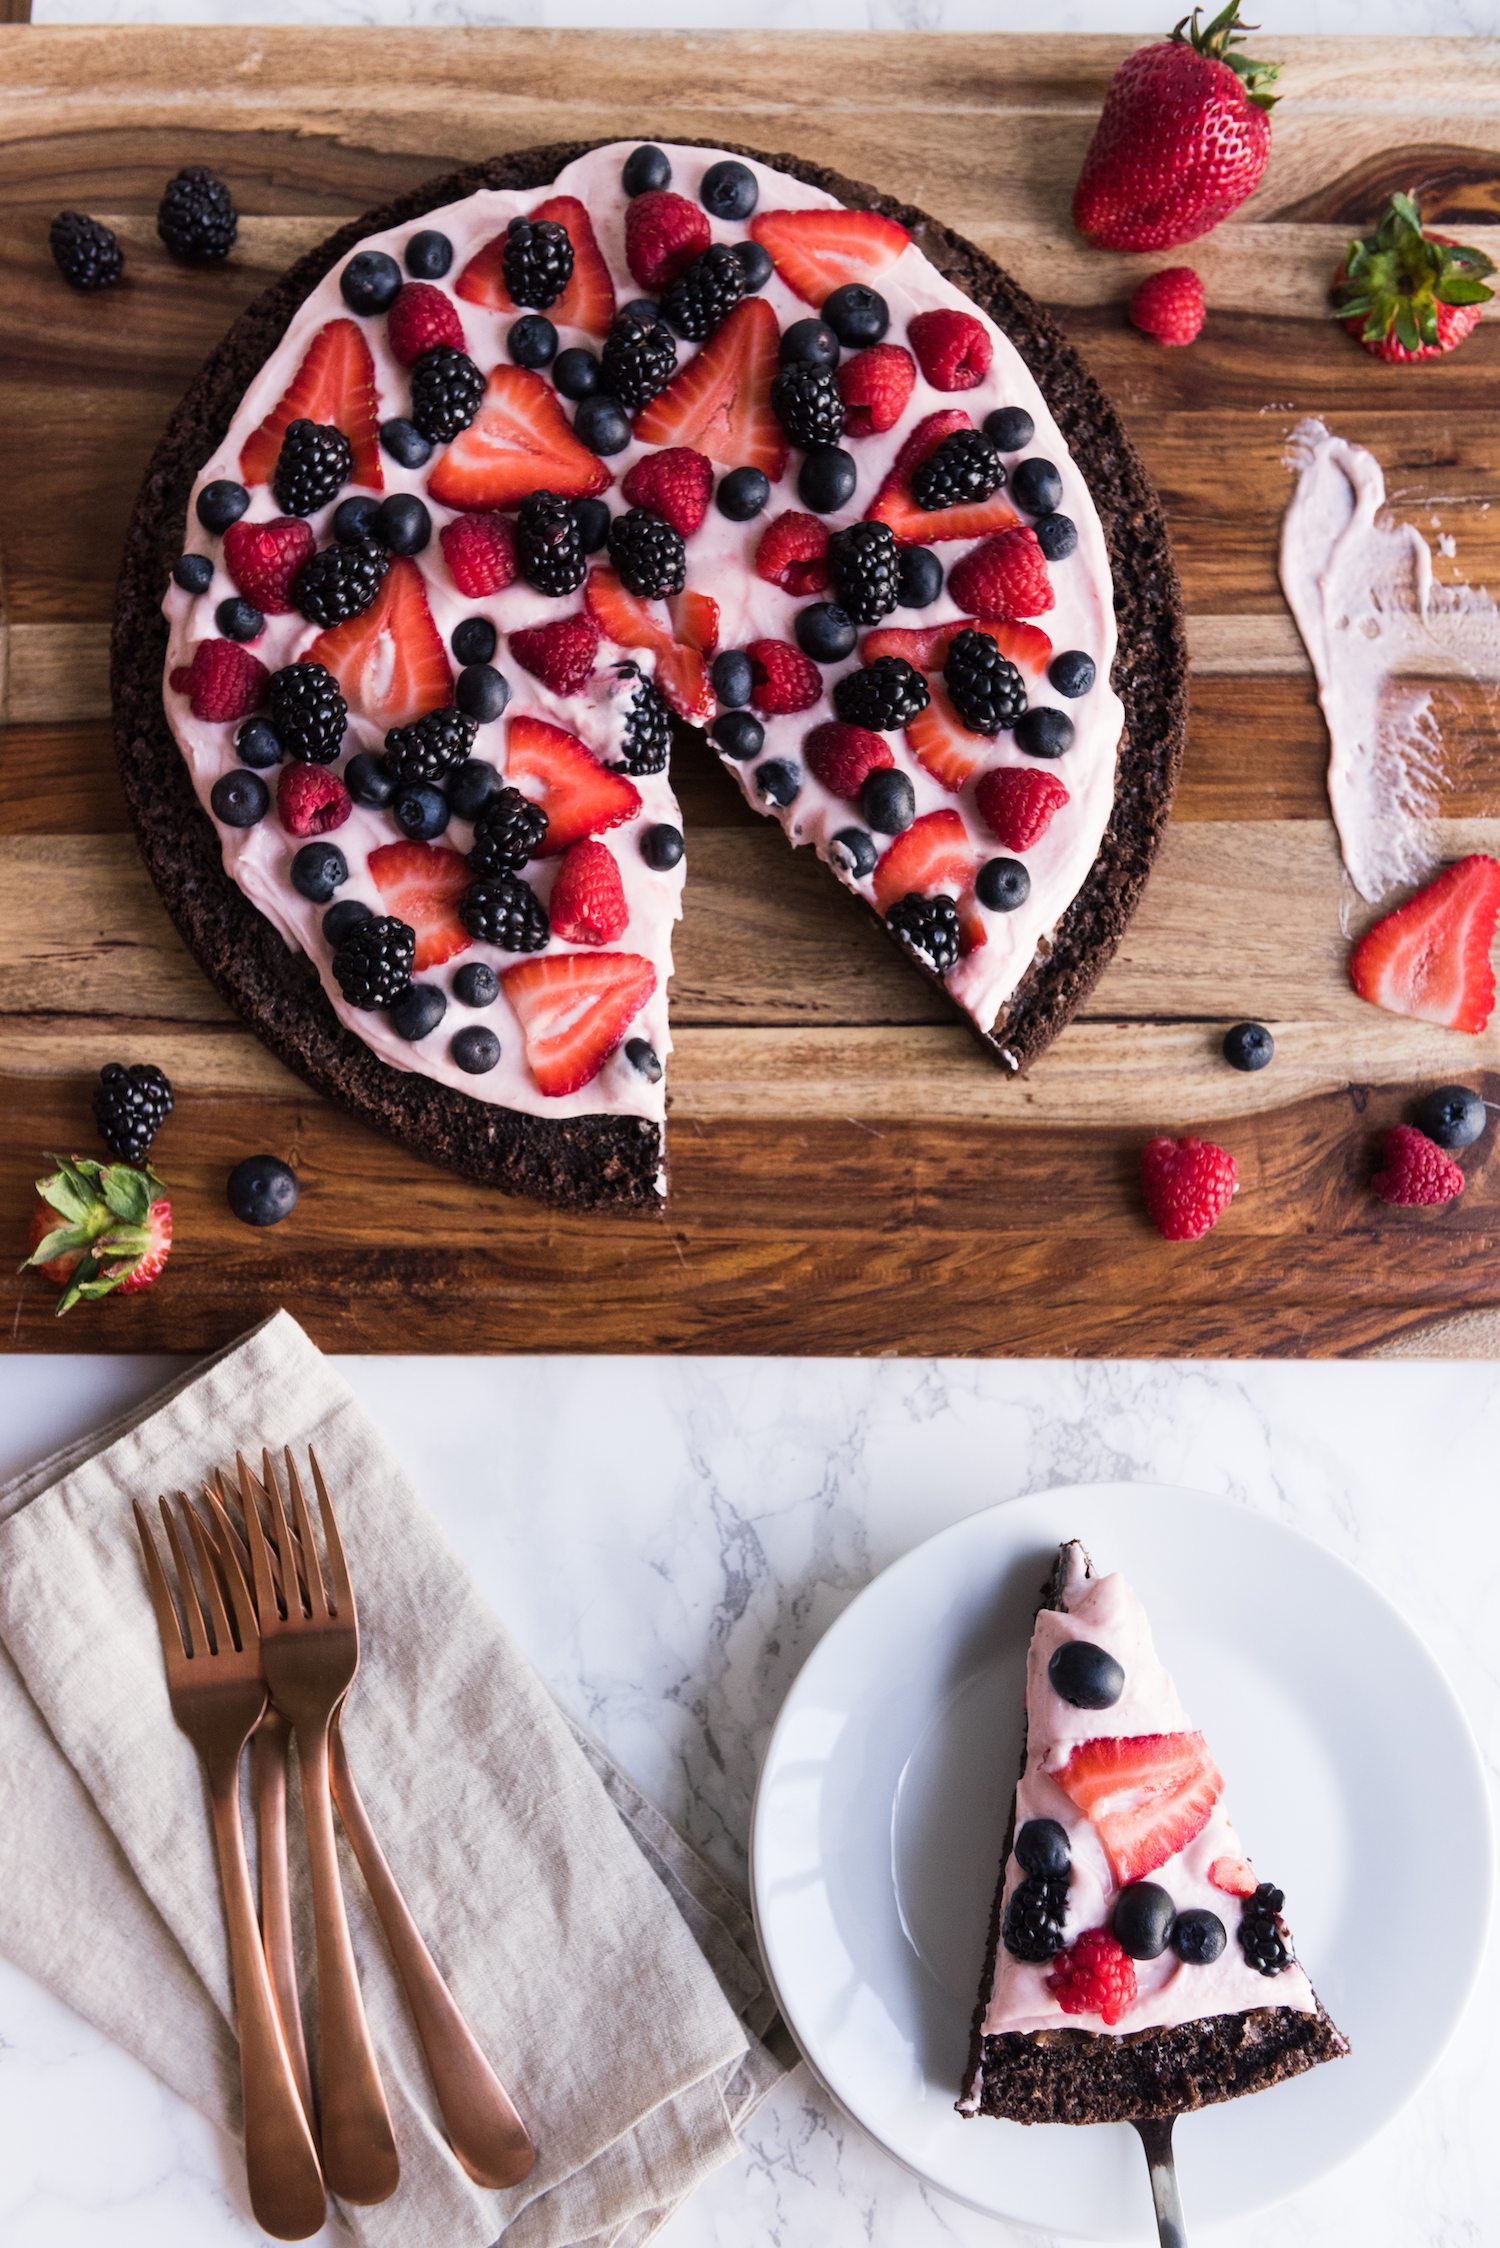 Brownie Pizza Recipe with Strawberry Buttercream Frosting | Love entertaining? Visit The Sweetest Occasion for fun party recipes, entertaining tips, festive cocktail recipes, party ideas and more!